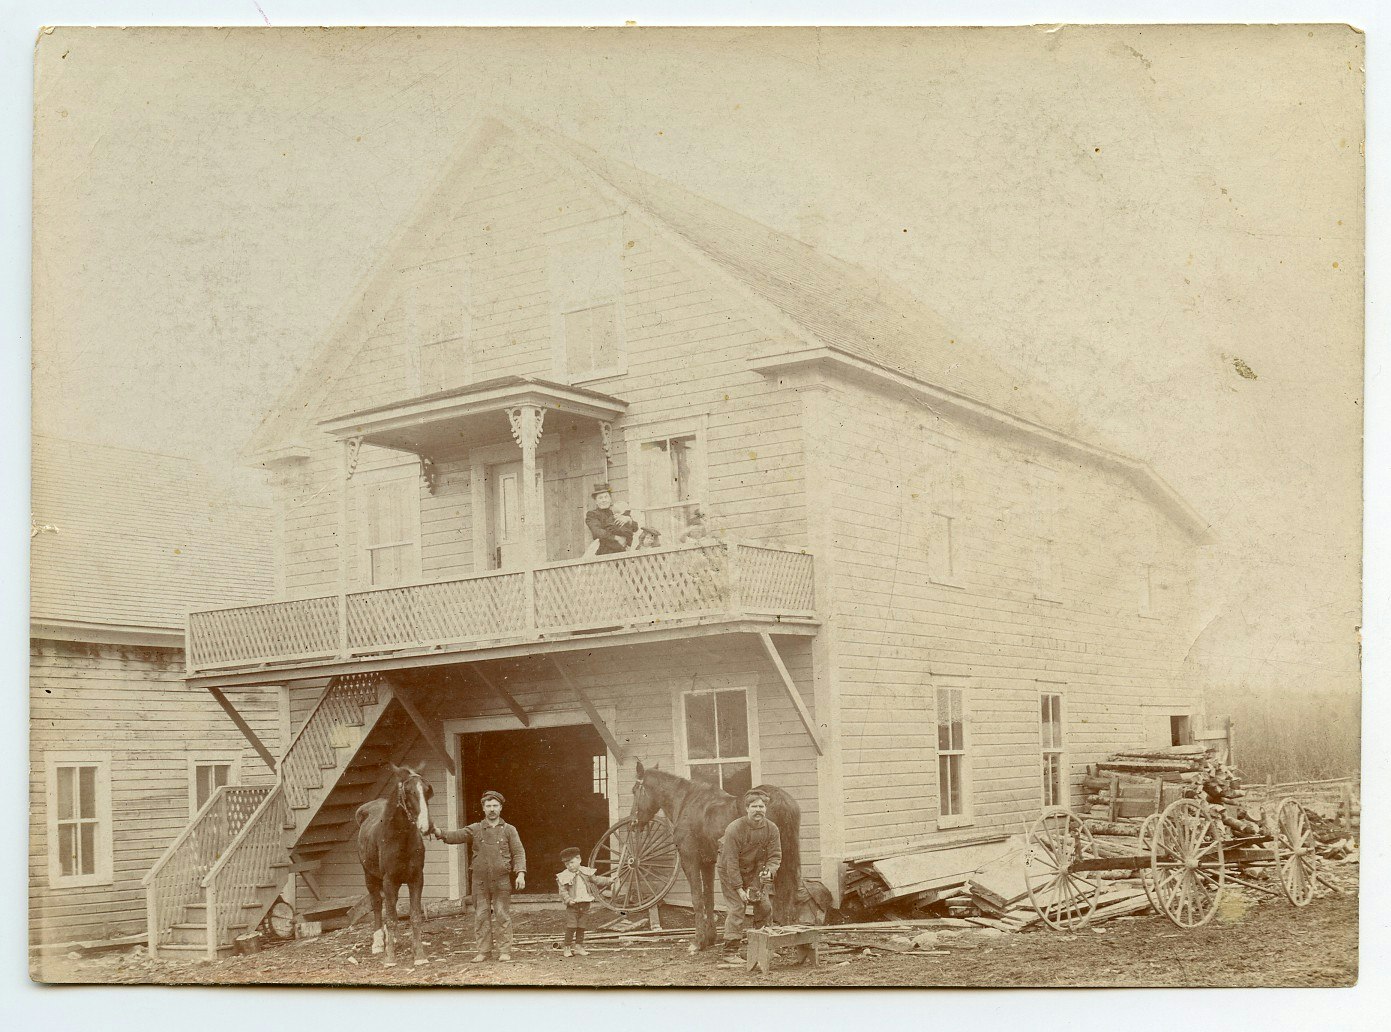 The Poulin-LaVerdiere family at their rural home in Saint-variste-de-Forsyth, Qubec, Canada, ca. 1890s, albumen print, Picher/LaVerdiere Family Photograph Collection, Special Collections, Colby College Libraries (30093)